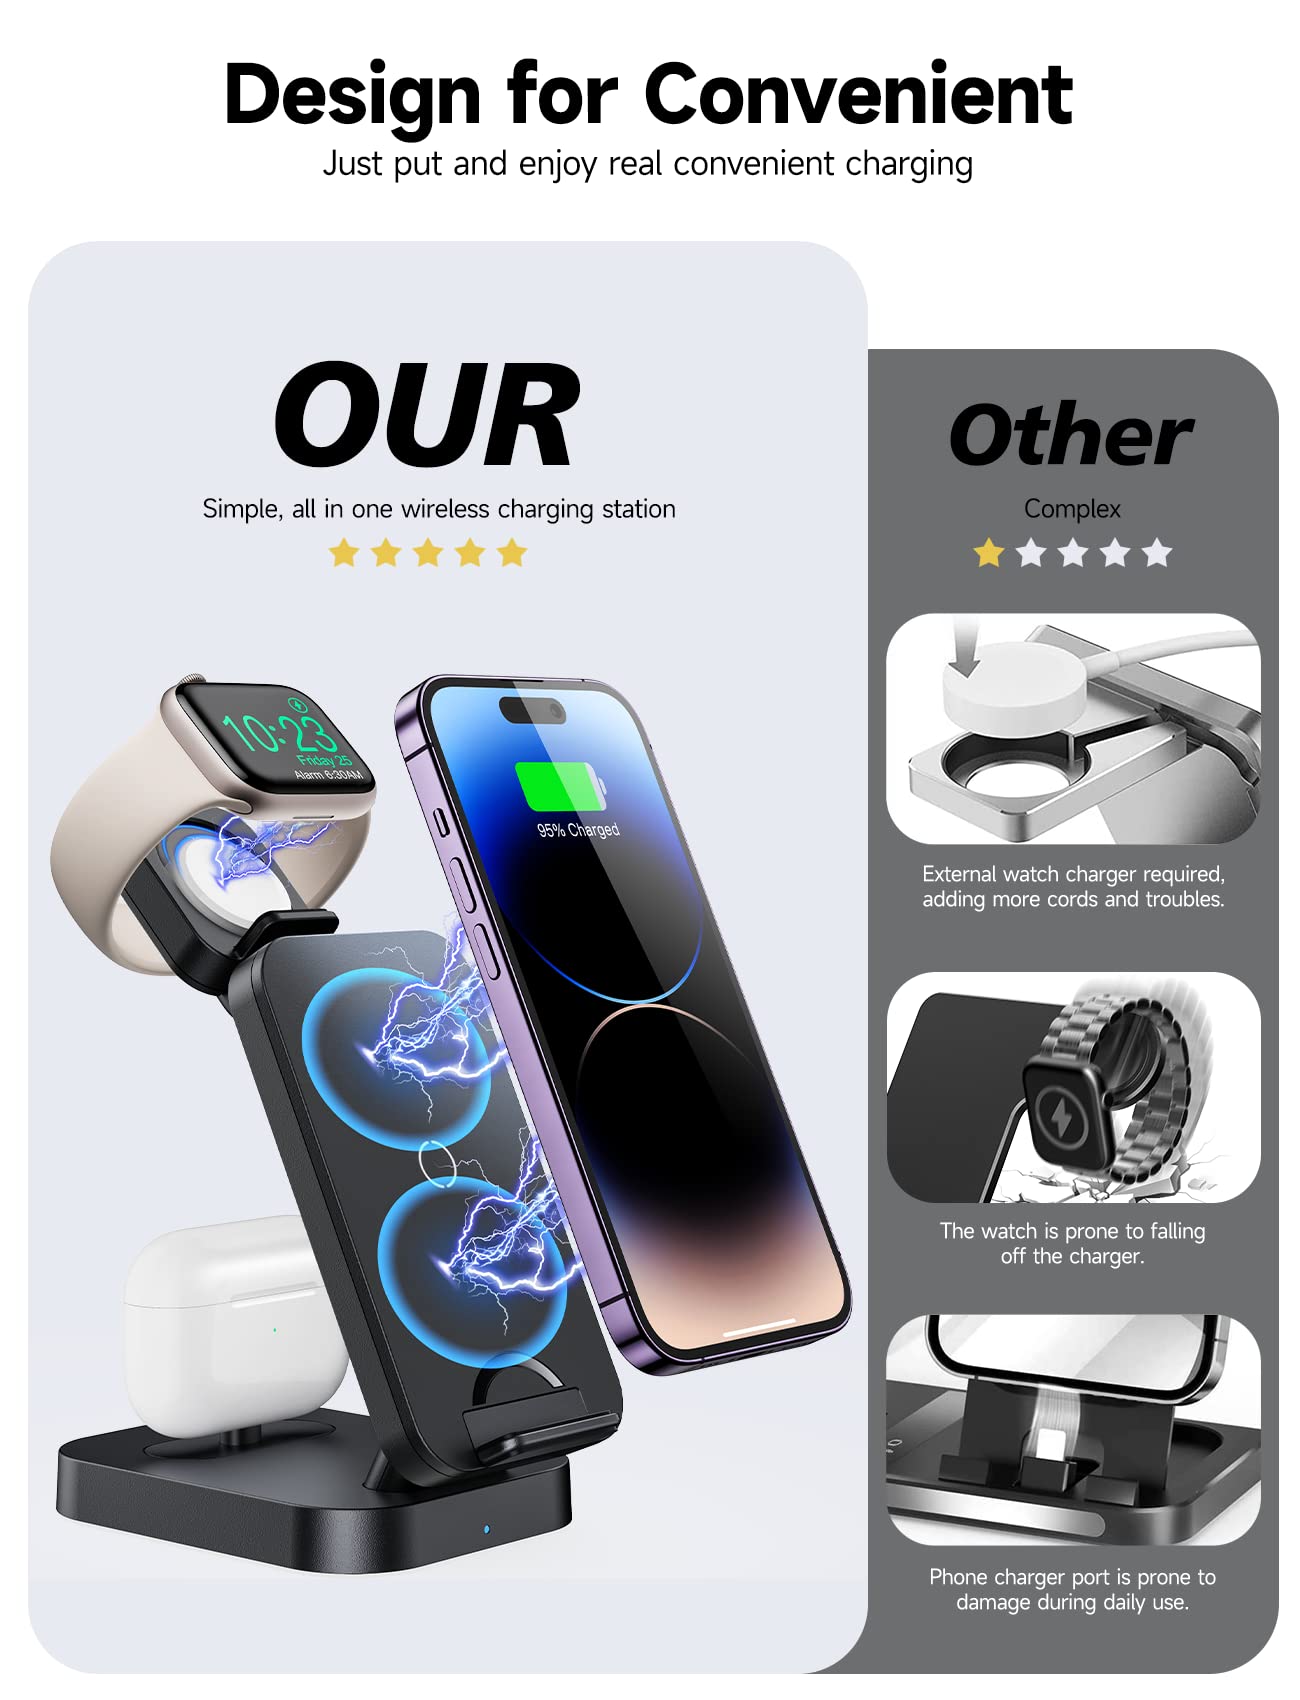 Conido Wireless Charging Station, 18W Fast 3 in 1 Wireless Charging Station for Multiple Devices Apple, Wireless Charger Stand for iPhone Apple Watch Airpods, iPhone Charging Station Dock Black